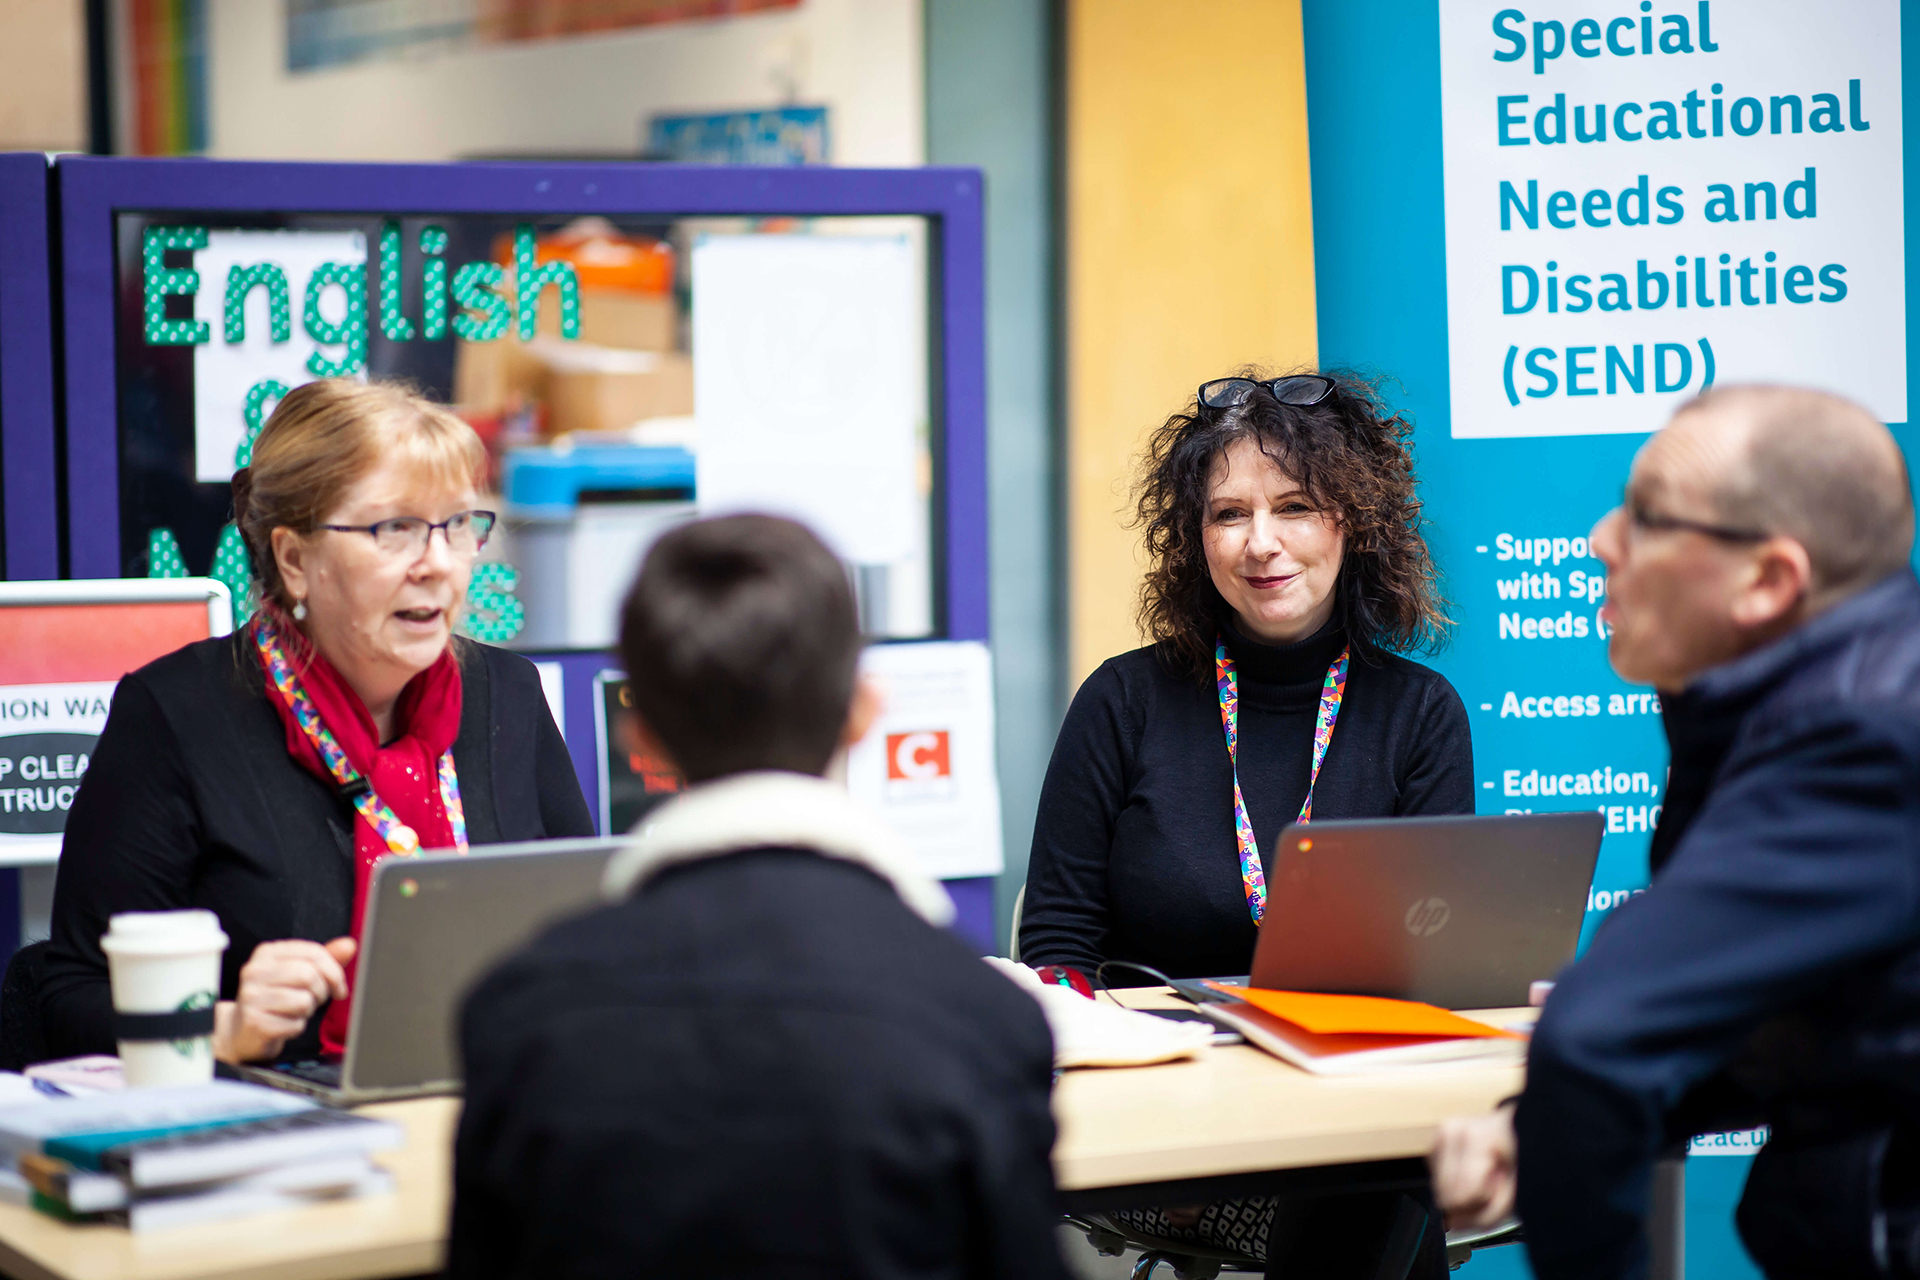 The Special Educational Needs and Disabilities also known as SEND table where two friendly colleagues of Leeds City College are talking to a father and his son